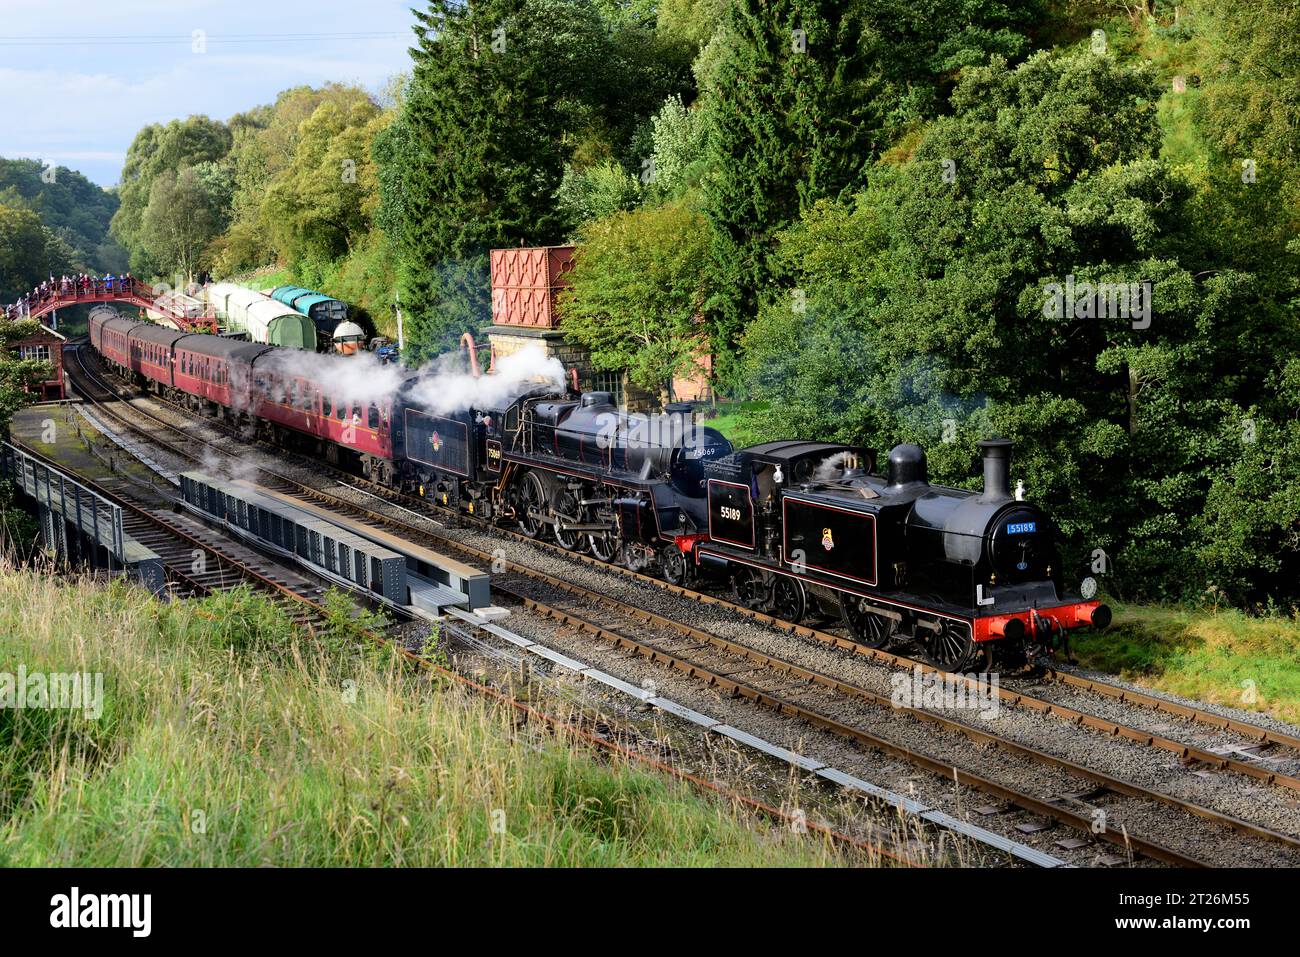 Caledonian Railway class 439 tank engine No 55189 and BR Standard class 4MT No 75069 at Goathland station on the North Yorkshire Moors Railway. Stock Photo